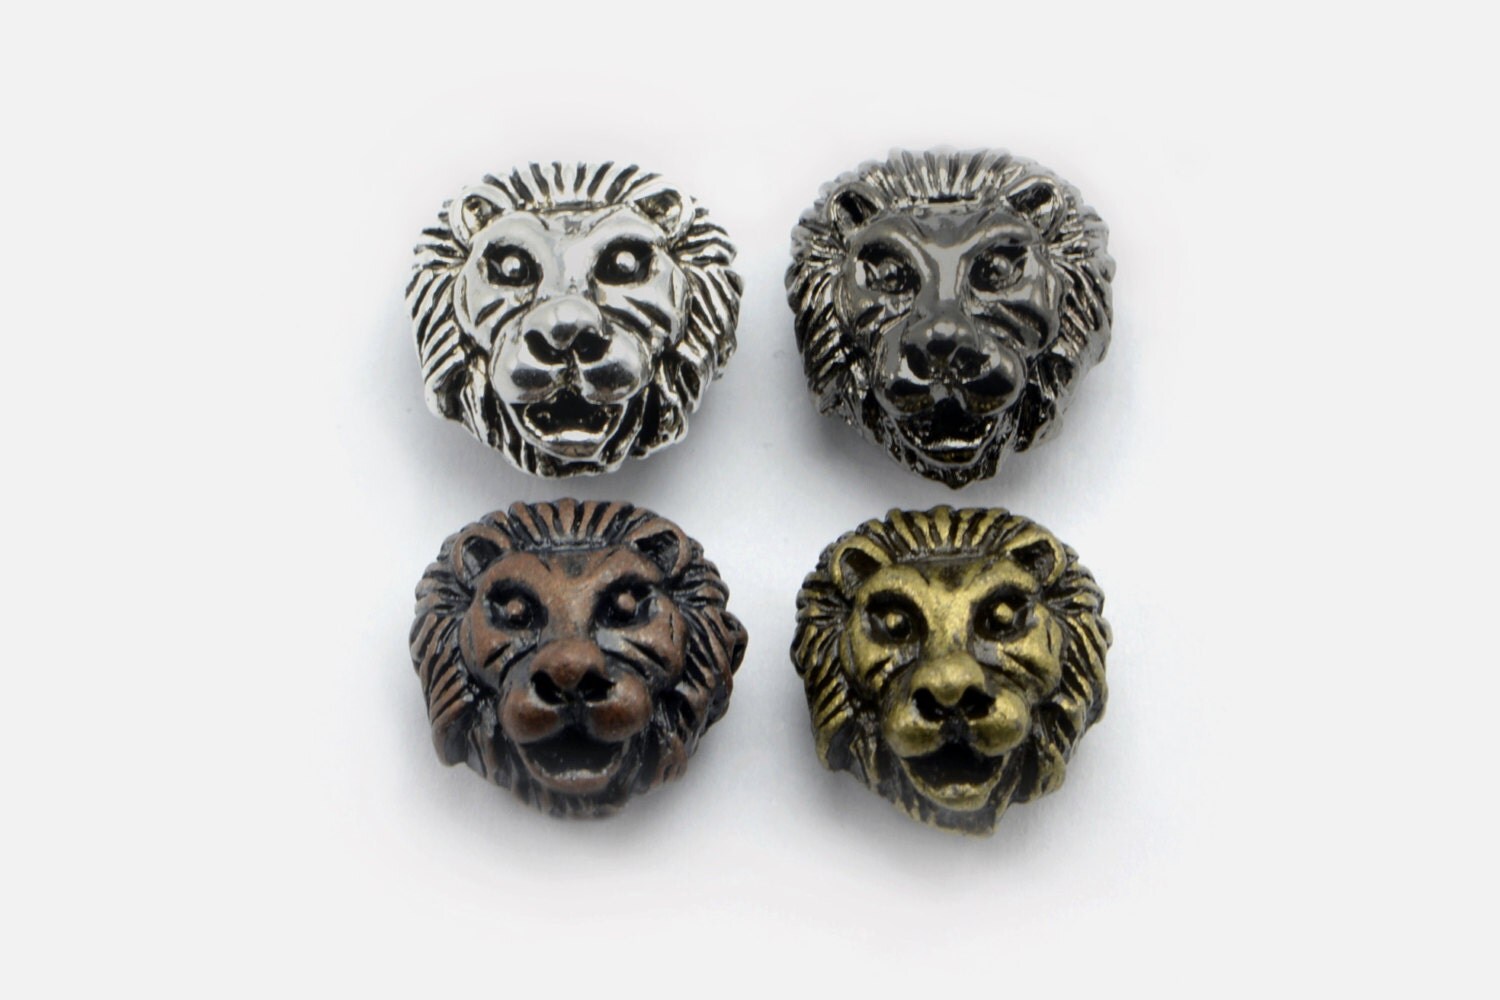 12pcs Lion Head Beads in Assorted Colors 3 Colors of Each